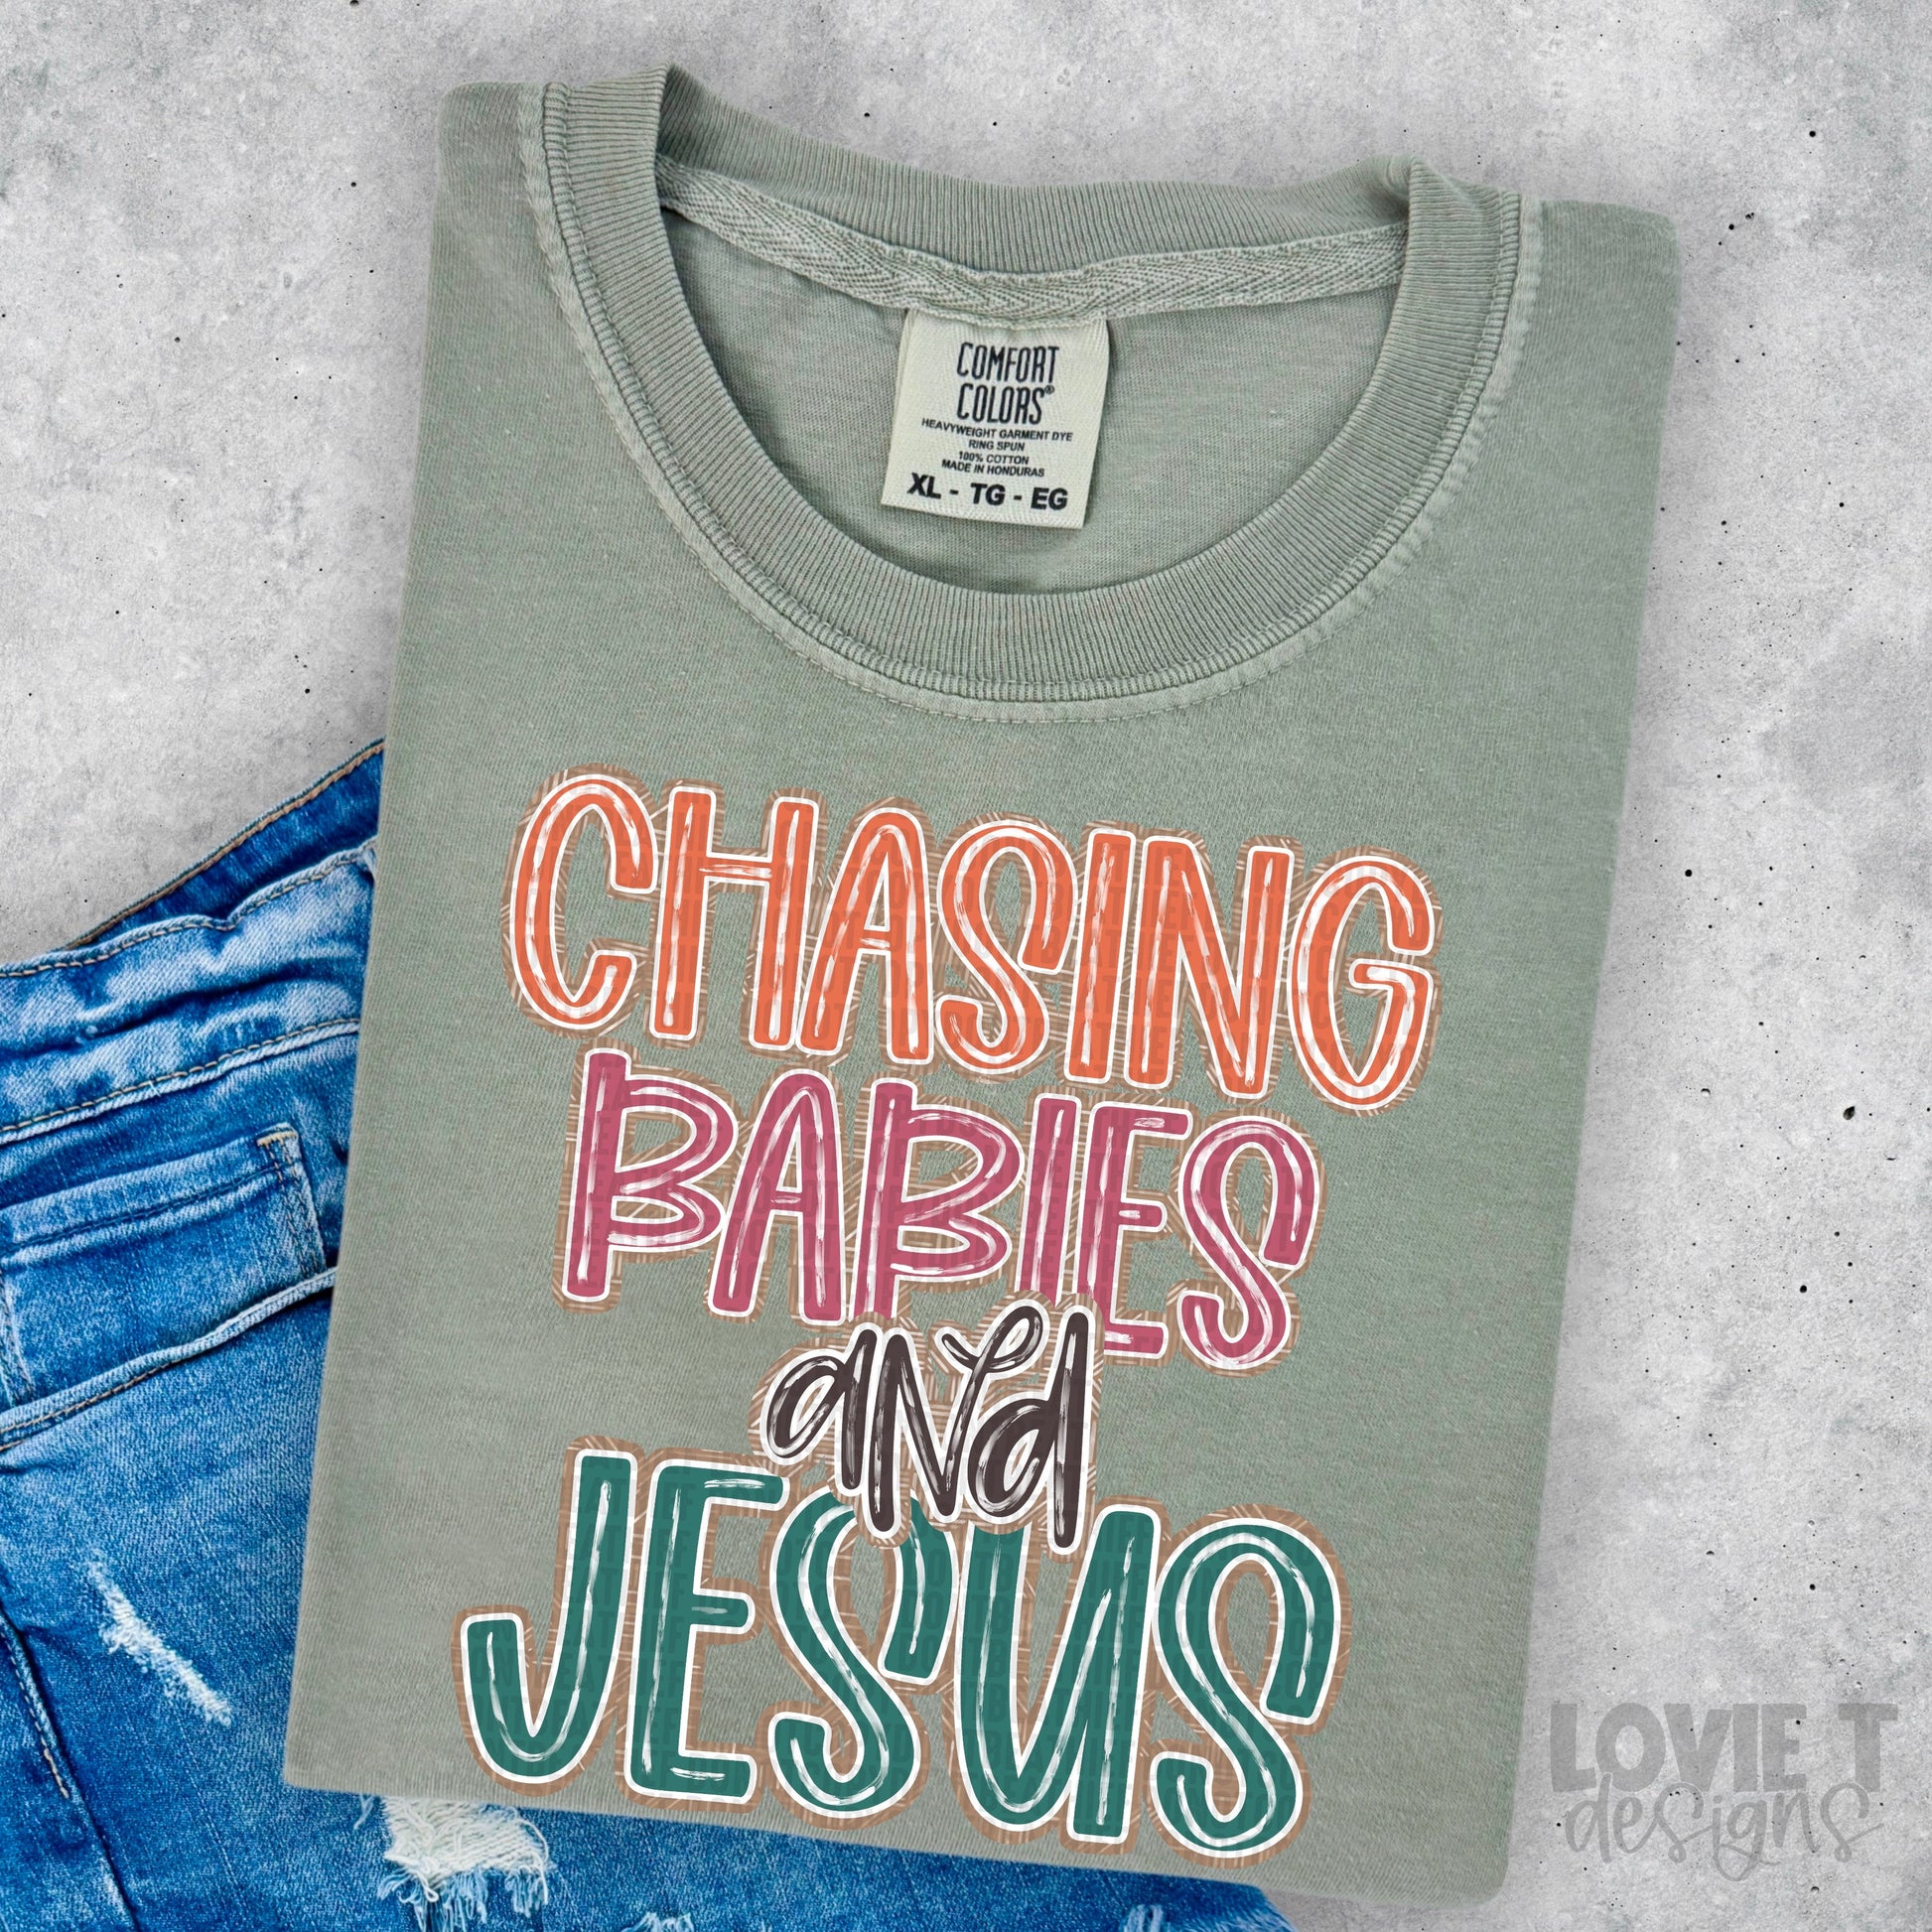 Chasing Babies and Jesus